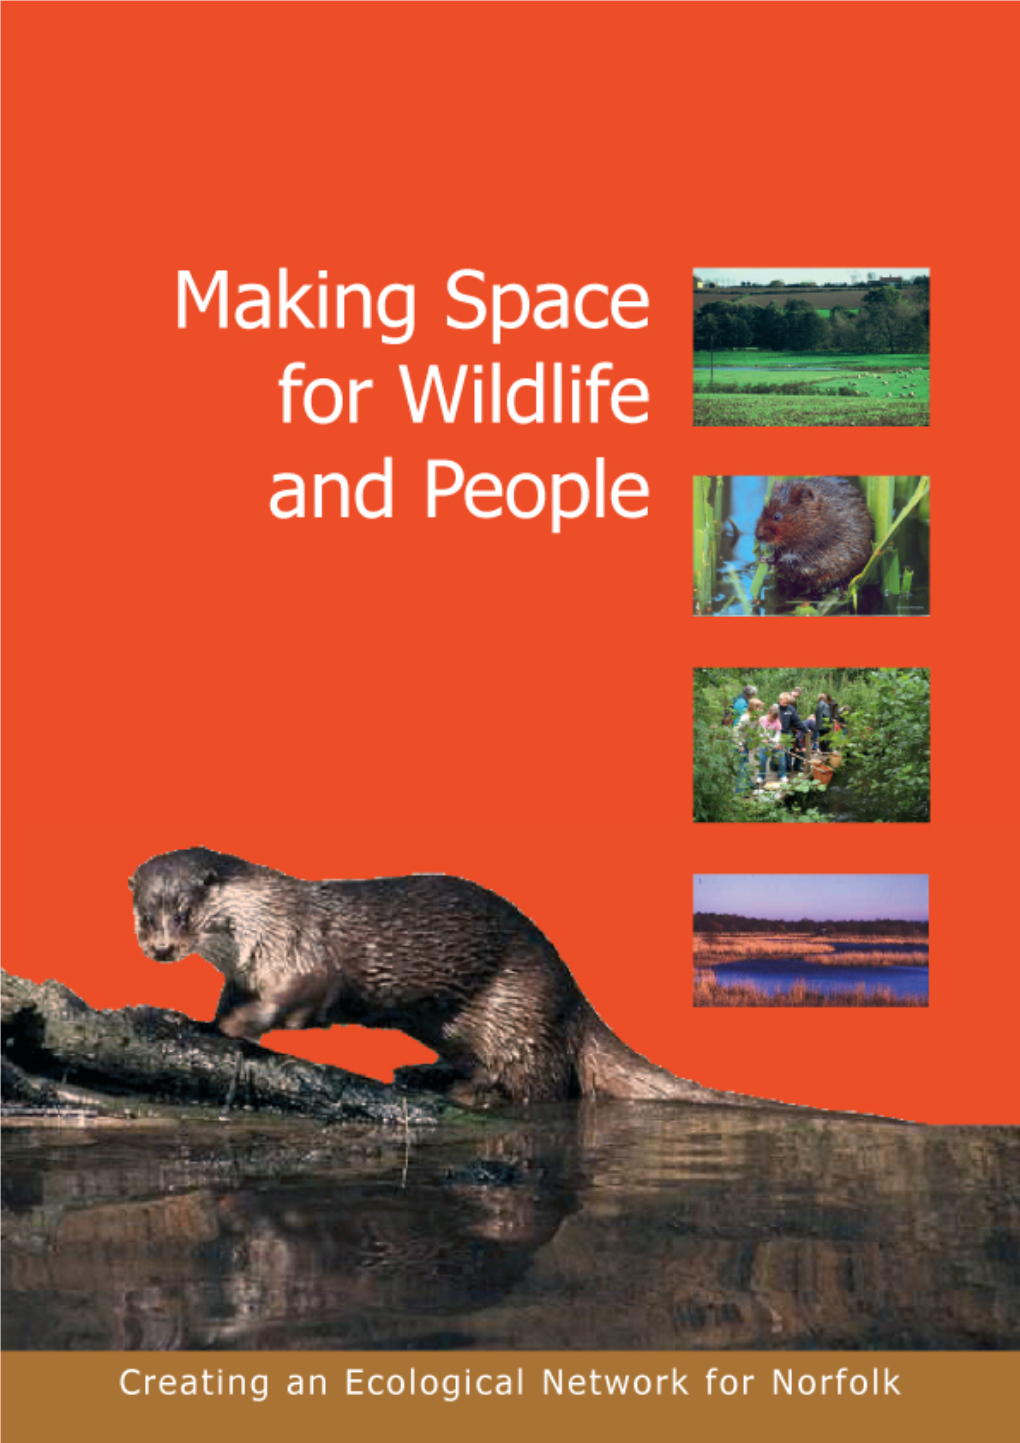 Pdf Making Space for Wildlife and People